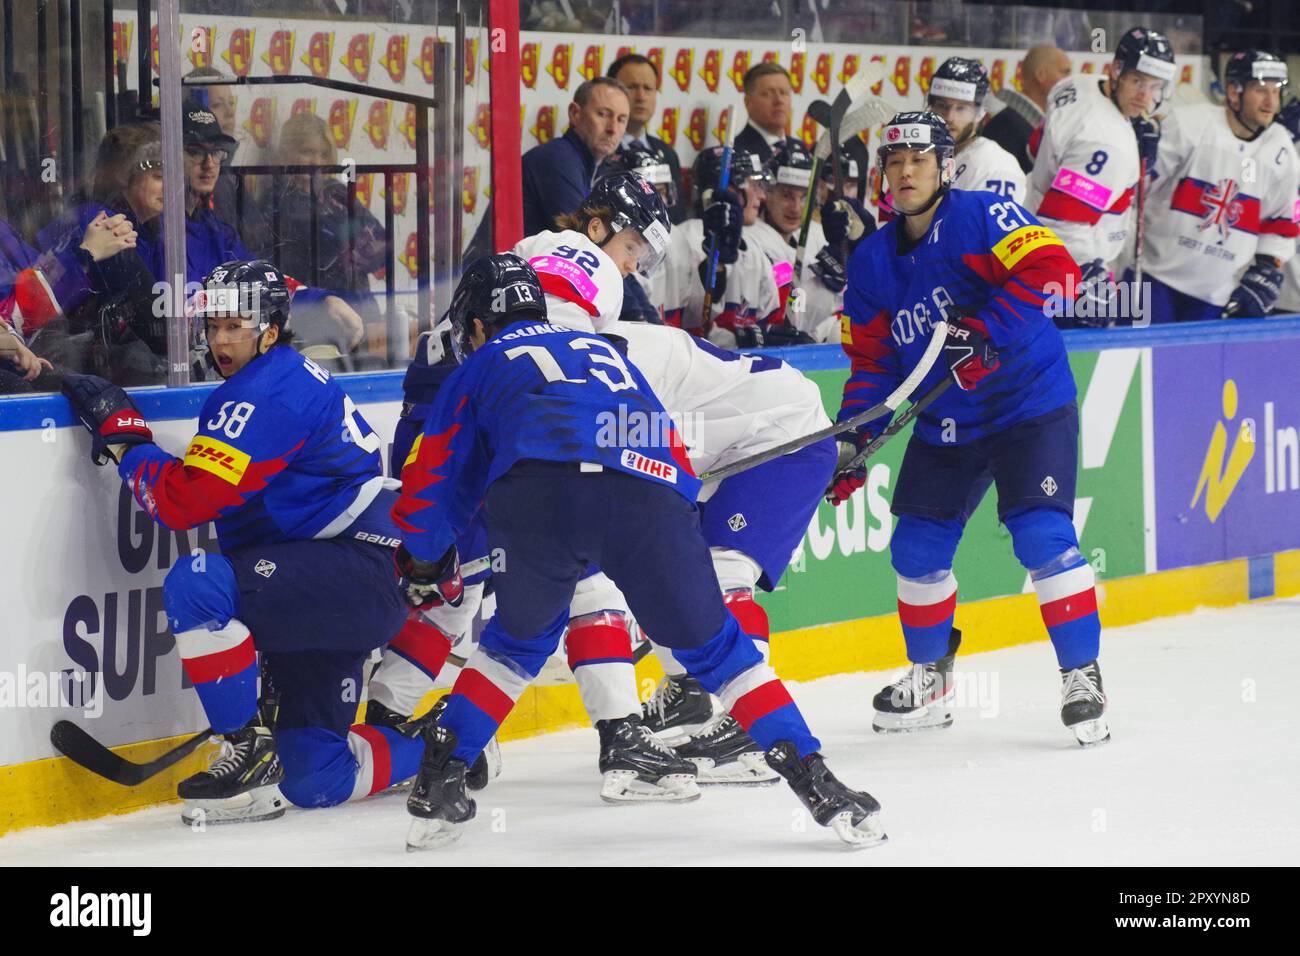 Nottingham, 29 April 2023. Heedoo Nam, Young Jun Lee and Jin Hui Ahn fight with Josh Waller for the puck during their match in the 2023 IIHF Ice Hockey World Championship, Division I, Group A tournament at the Motorpoint Arena, Nottingham. Credit: Colin Edwards Stock Photo